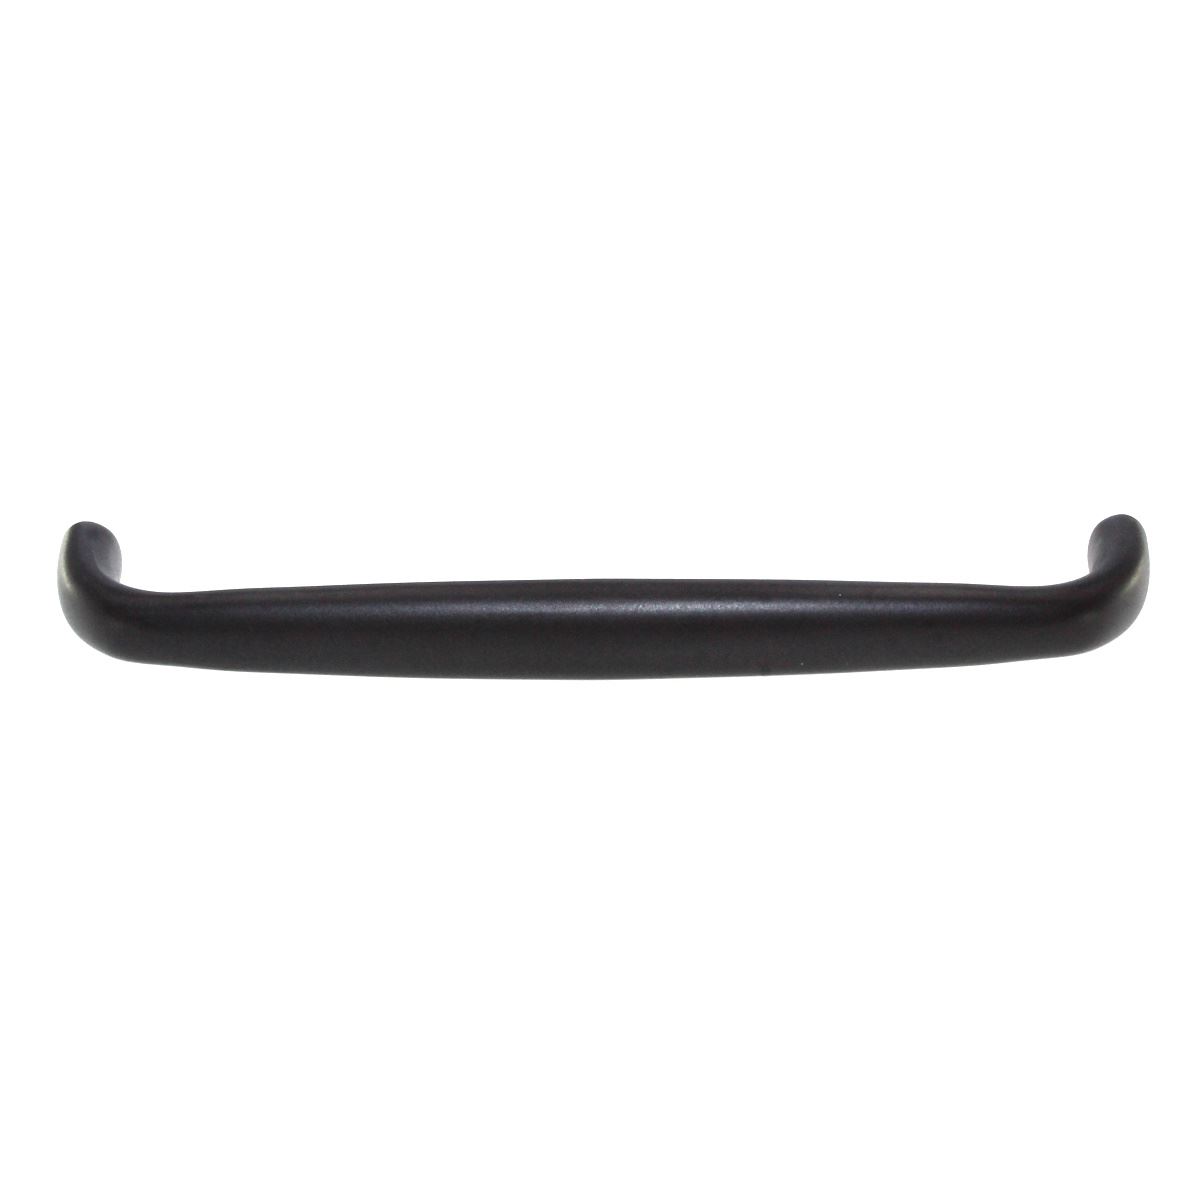 Schaub And Company Traditional Cabinet Pull 6" Ctr Oil-Rubbed Bronze 737-10B